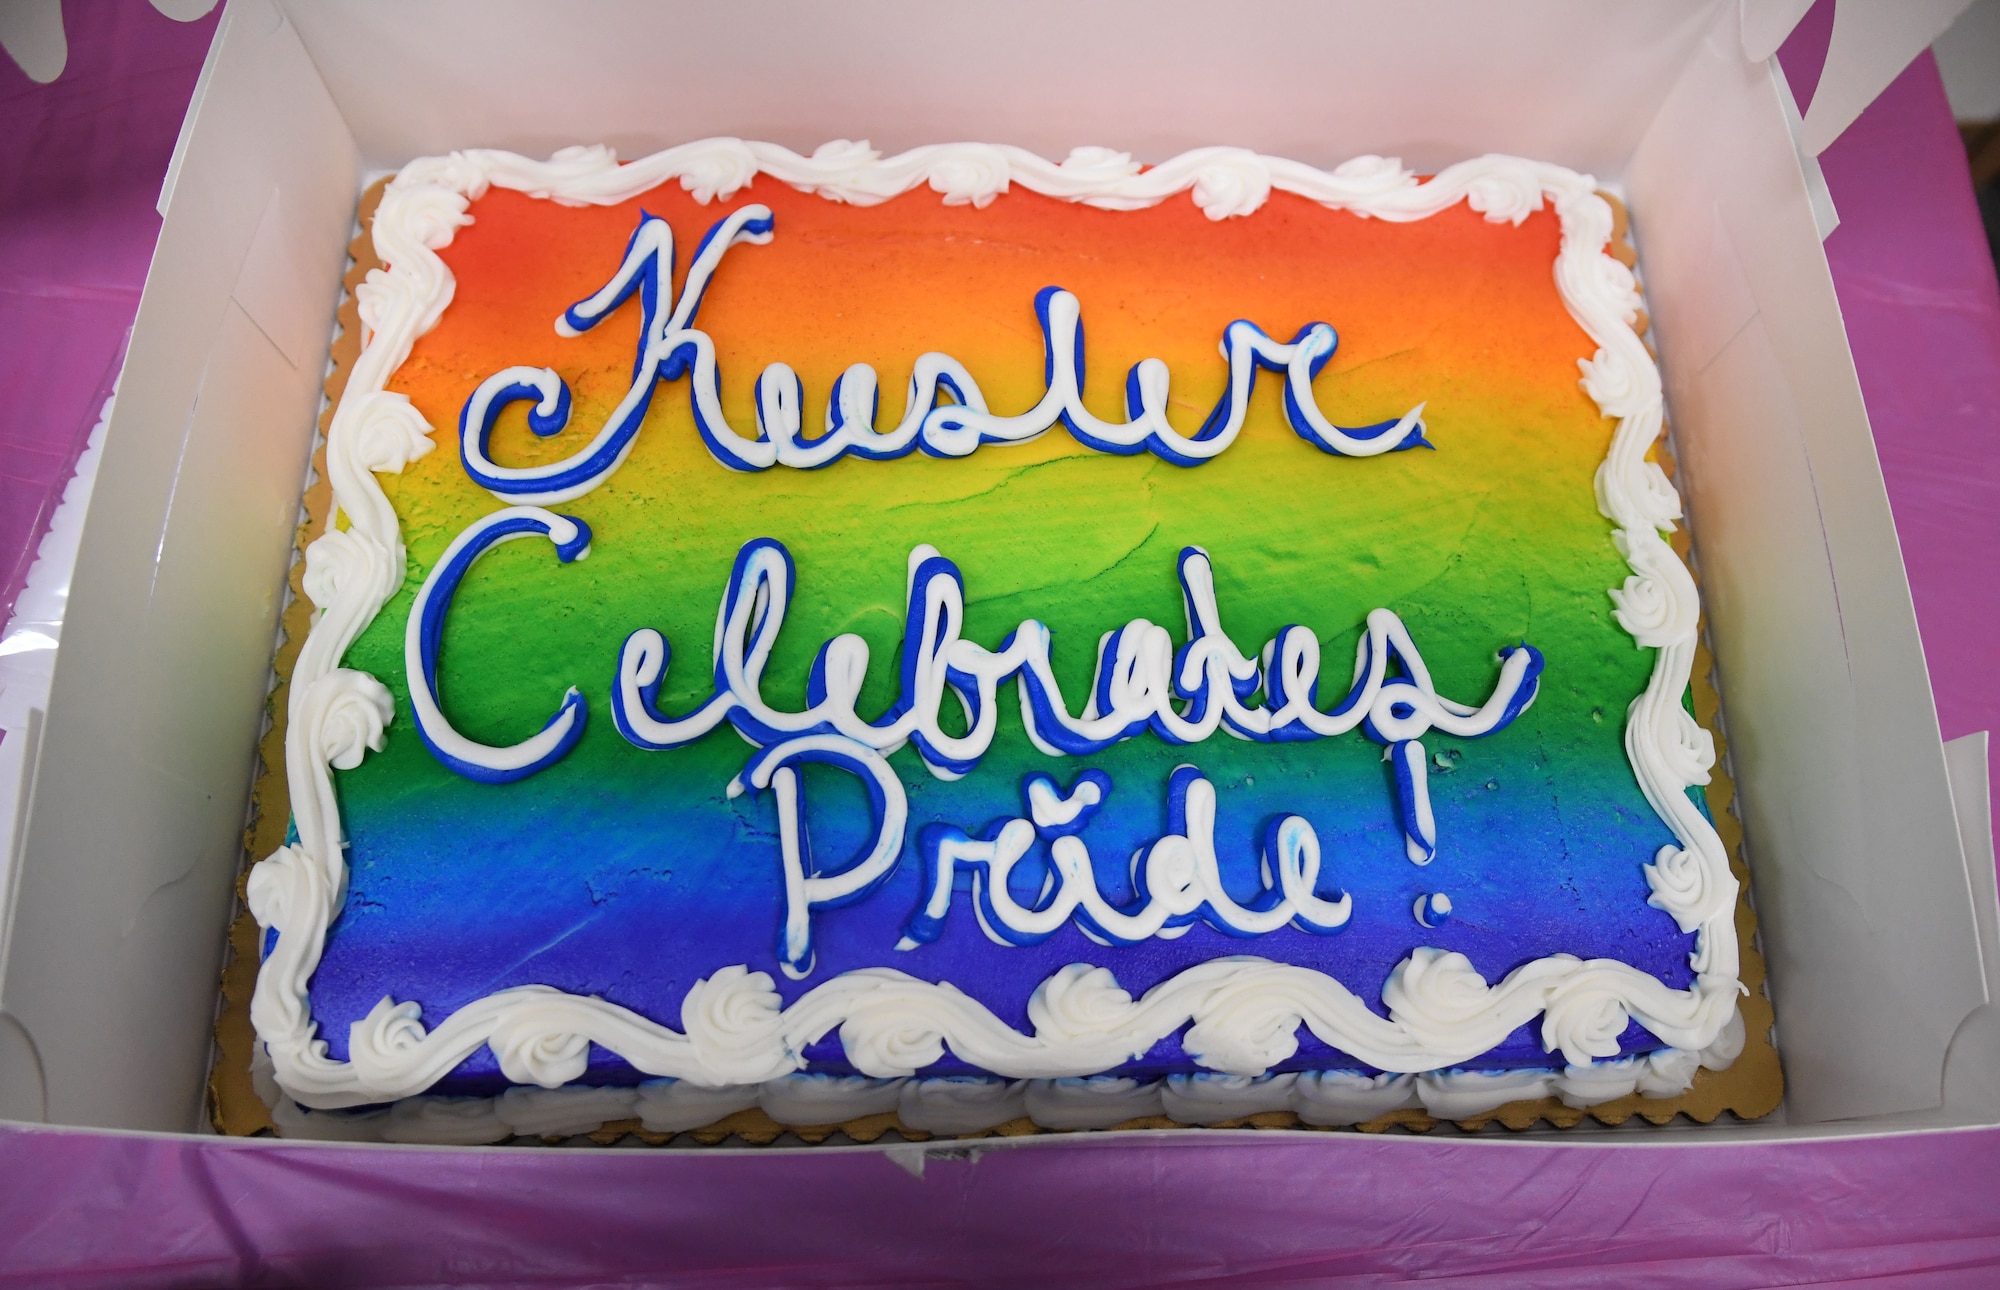 A cake is on display during the LGBTQ+ Informational Expo inside the Roberts Consolidated Aircraft Maintenance Facility at Keesler Air Force Base, Mississippi, June 25, 2021. Keesler celebrated Pride Month throughout June, with events such as a scavenger hunt, guest speaker and discussion panel. (U.S. Air Force photo by Kemberly Groue)